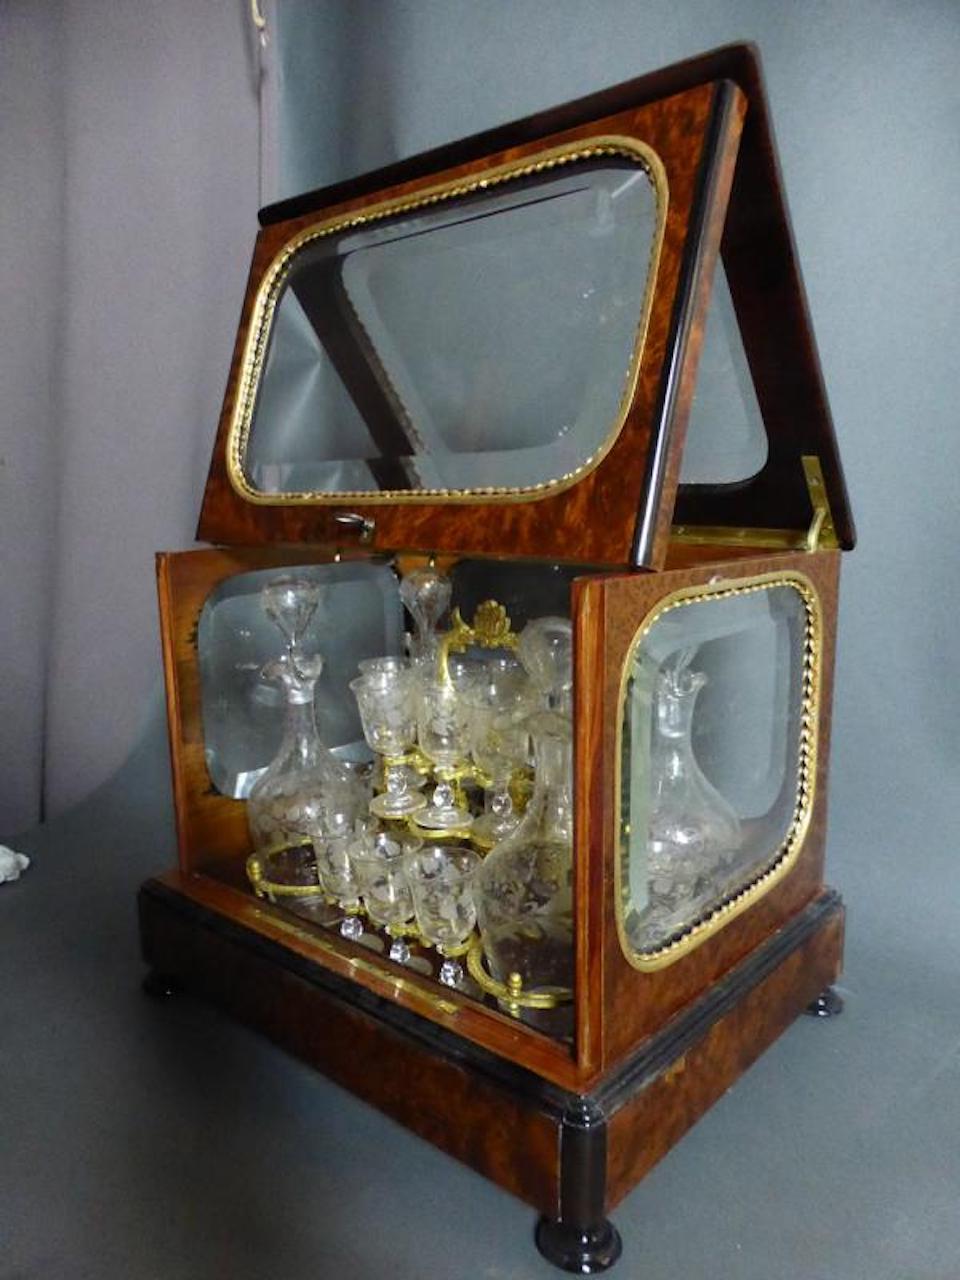 Beautiful 19th century French liquor cellar in native wood marquetry and beveled glasses.
This one is complete with its glassware 4 decanters and 16 glasses.
Very good condition and quality.